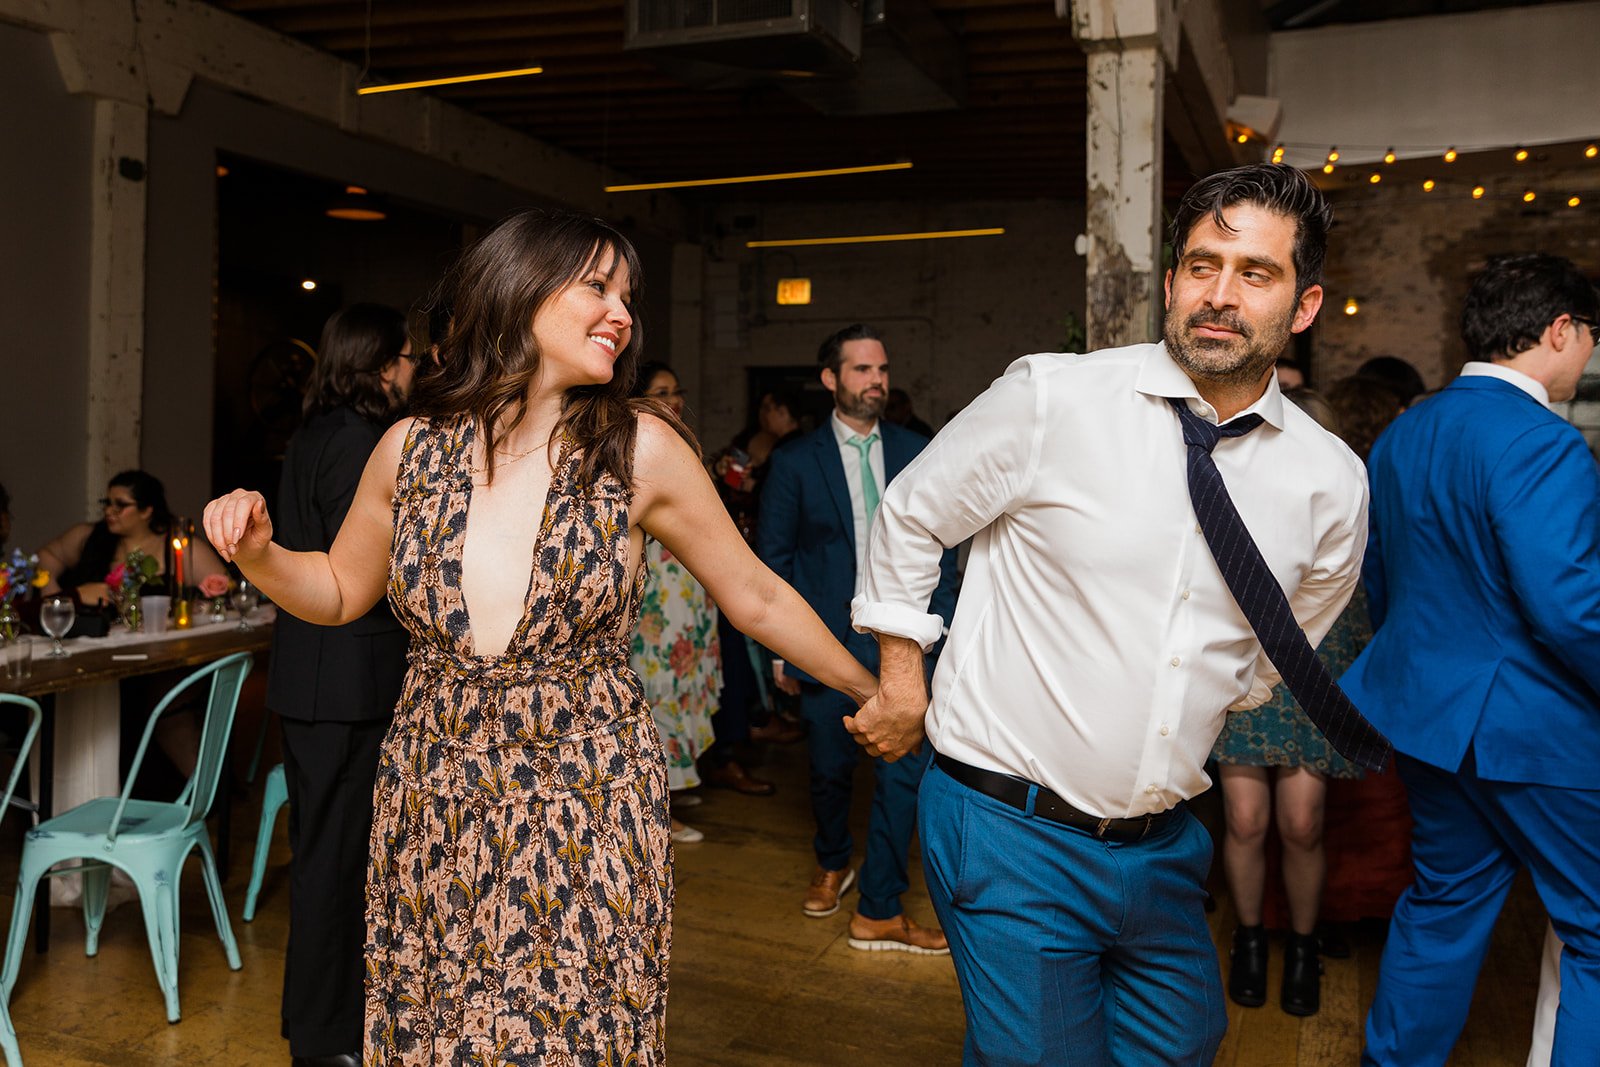  Documentary candid photo of a guests dancing at nontraditional Jewish and Venezuelan wedding at The Joinery Chicago an Industrial loft wedding venue In Logan Square.  